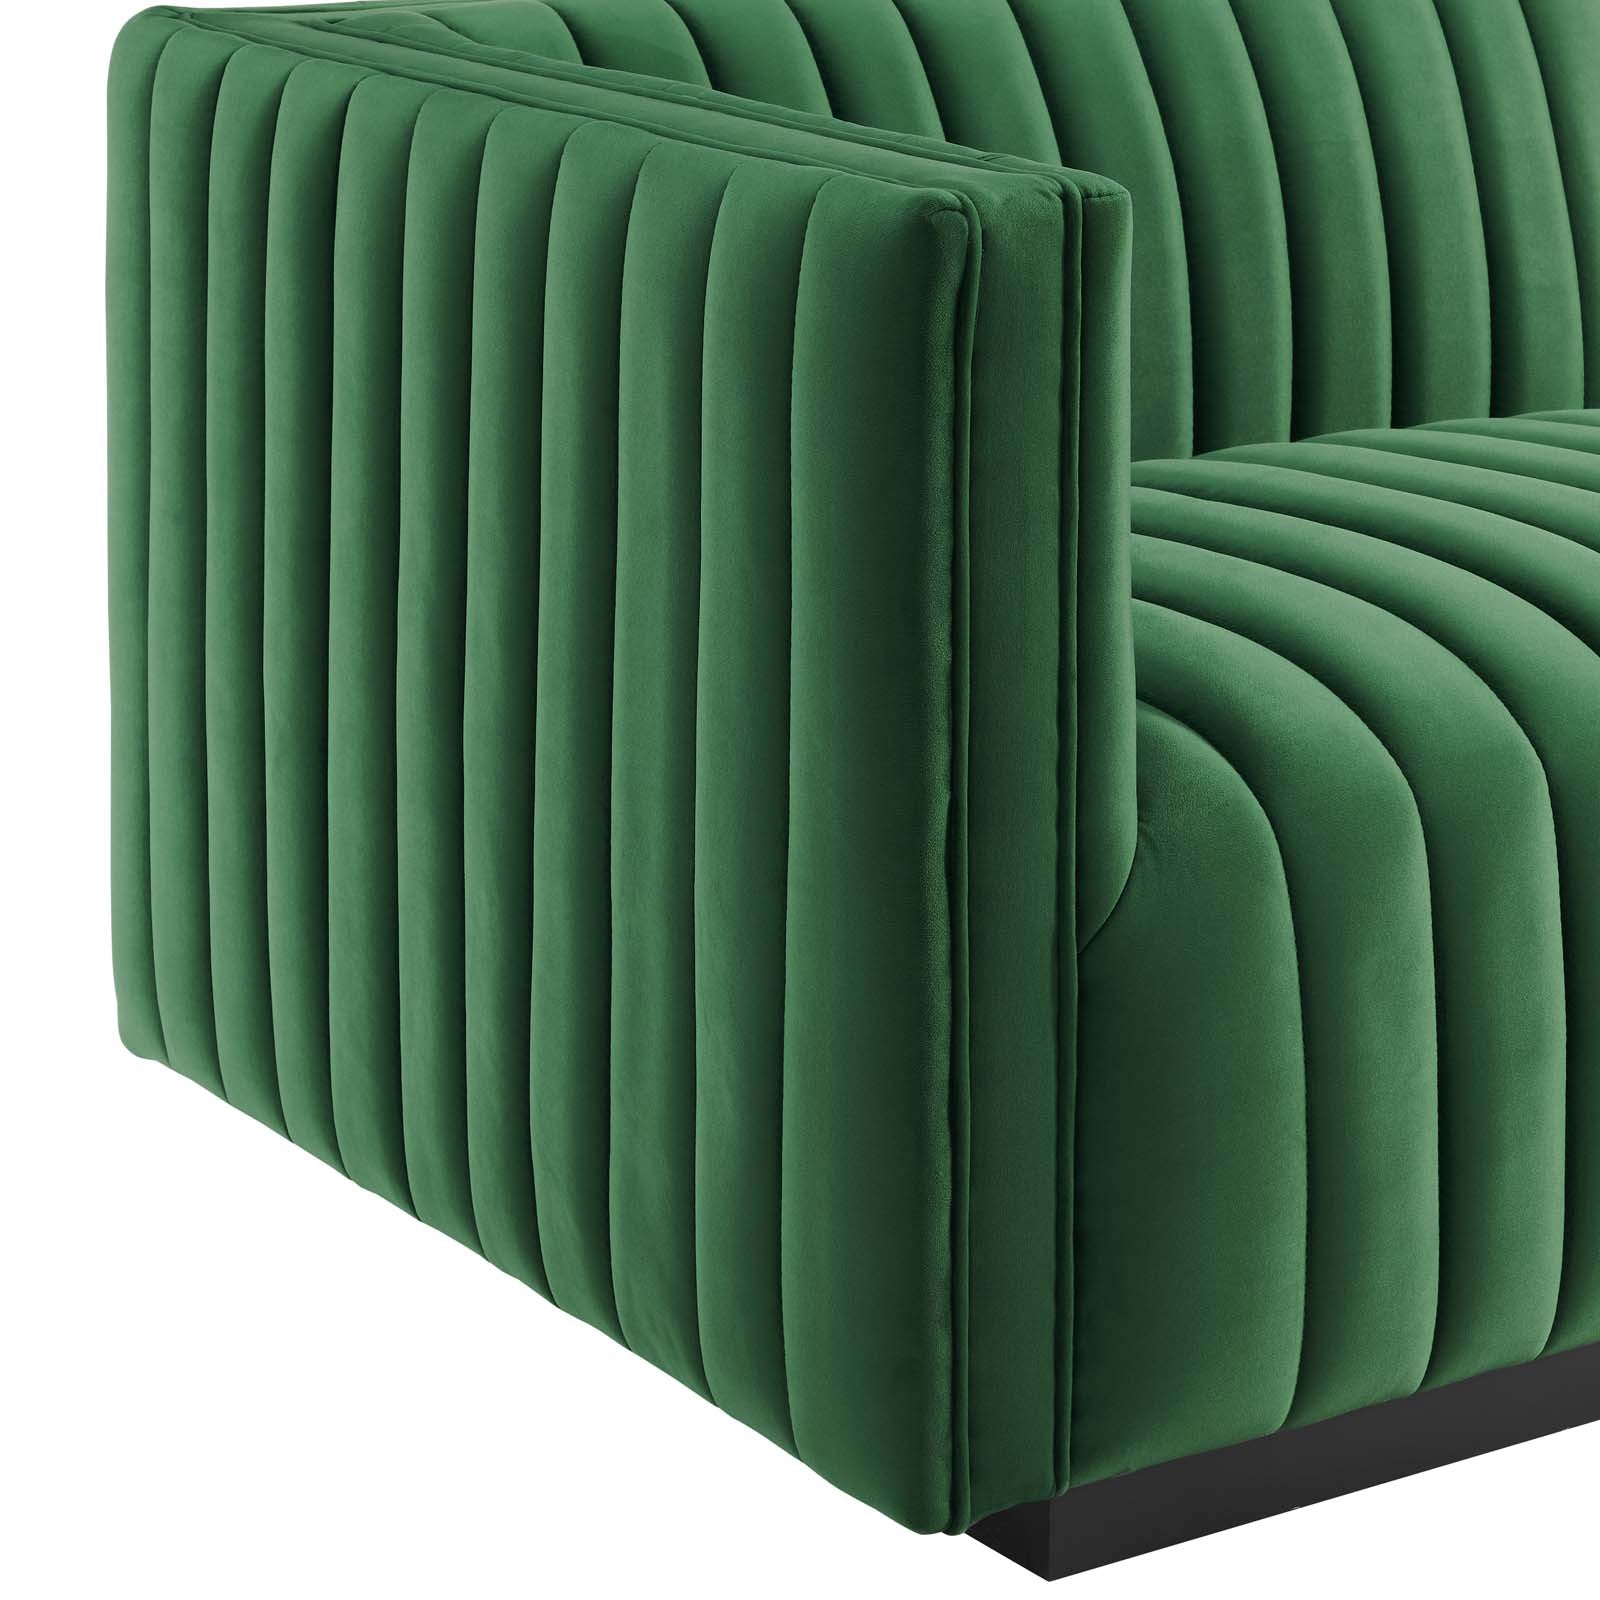 Modway Sofas & Couches - Conjure Channel Tufted Performance Velvet 4-Piece Sofa Black Emerald